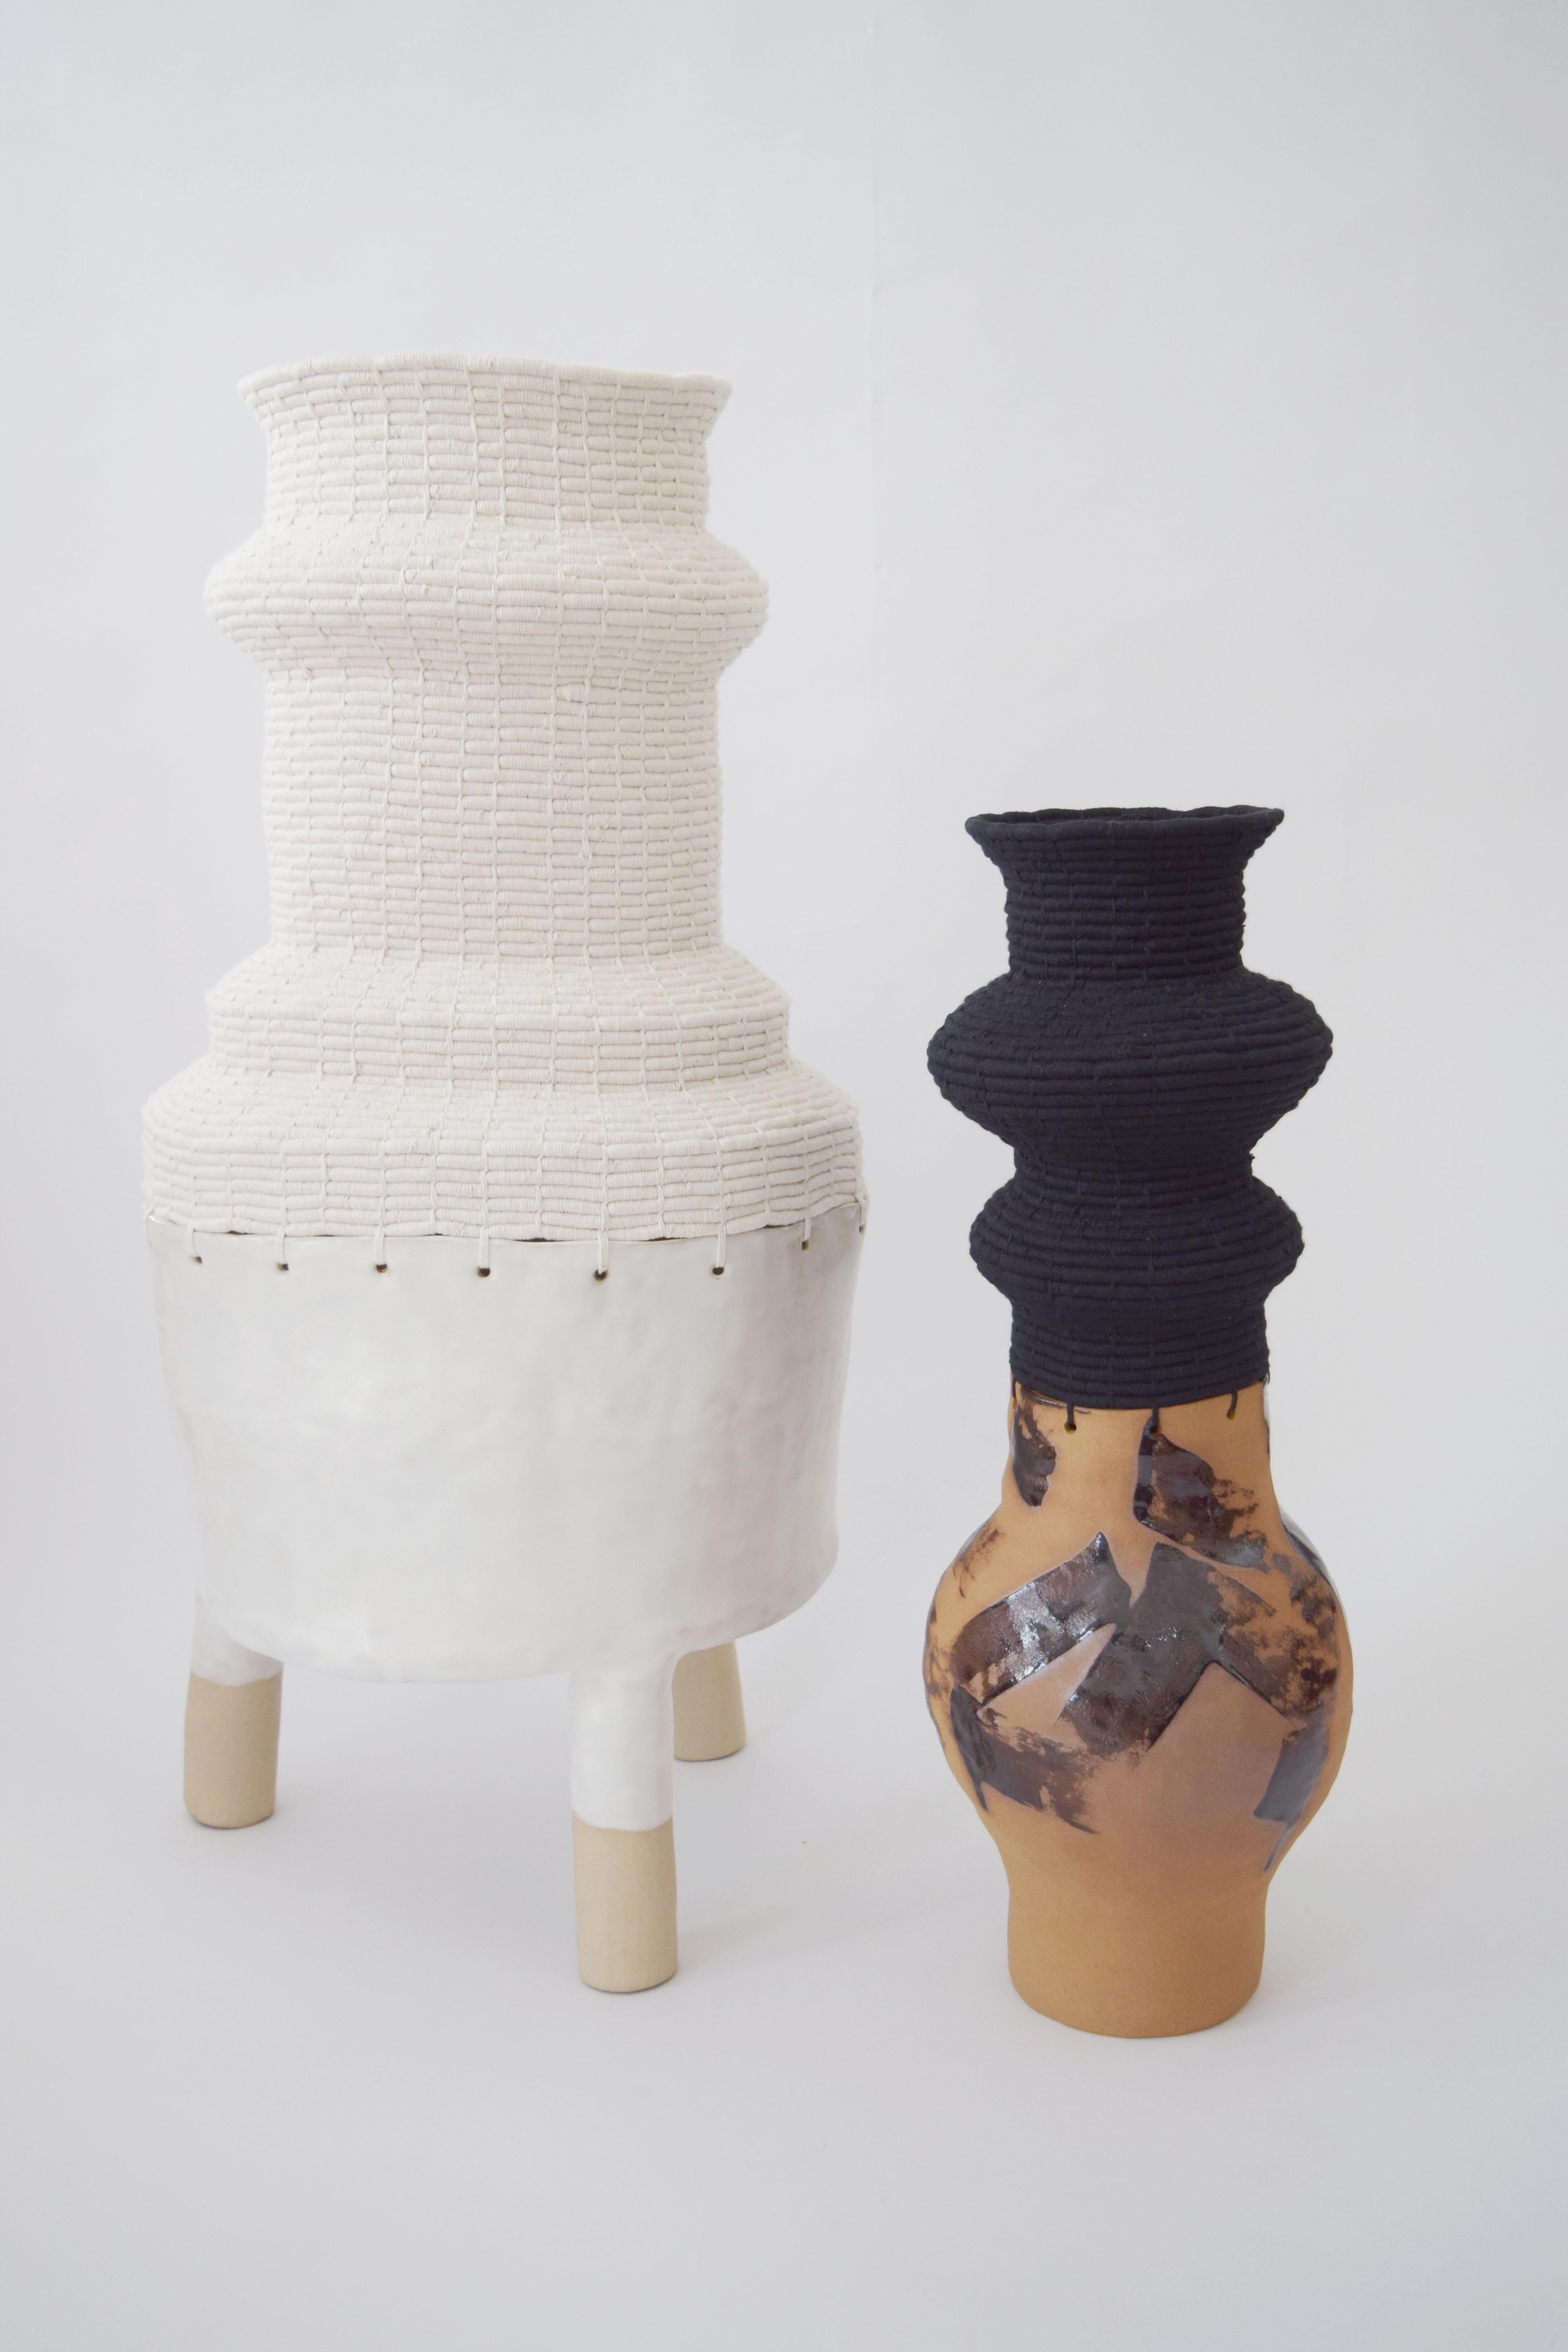 Contemporary One of a Kind Hand Painted Ceramic and Woven Cotton Vessel in Natural and Black